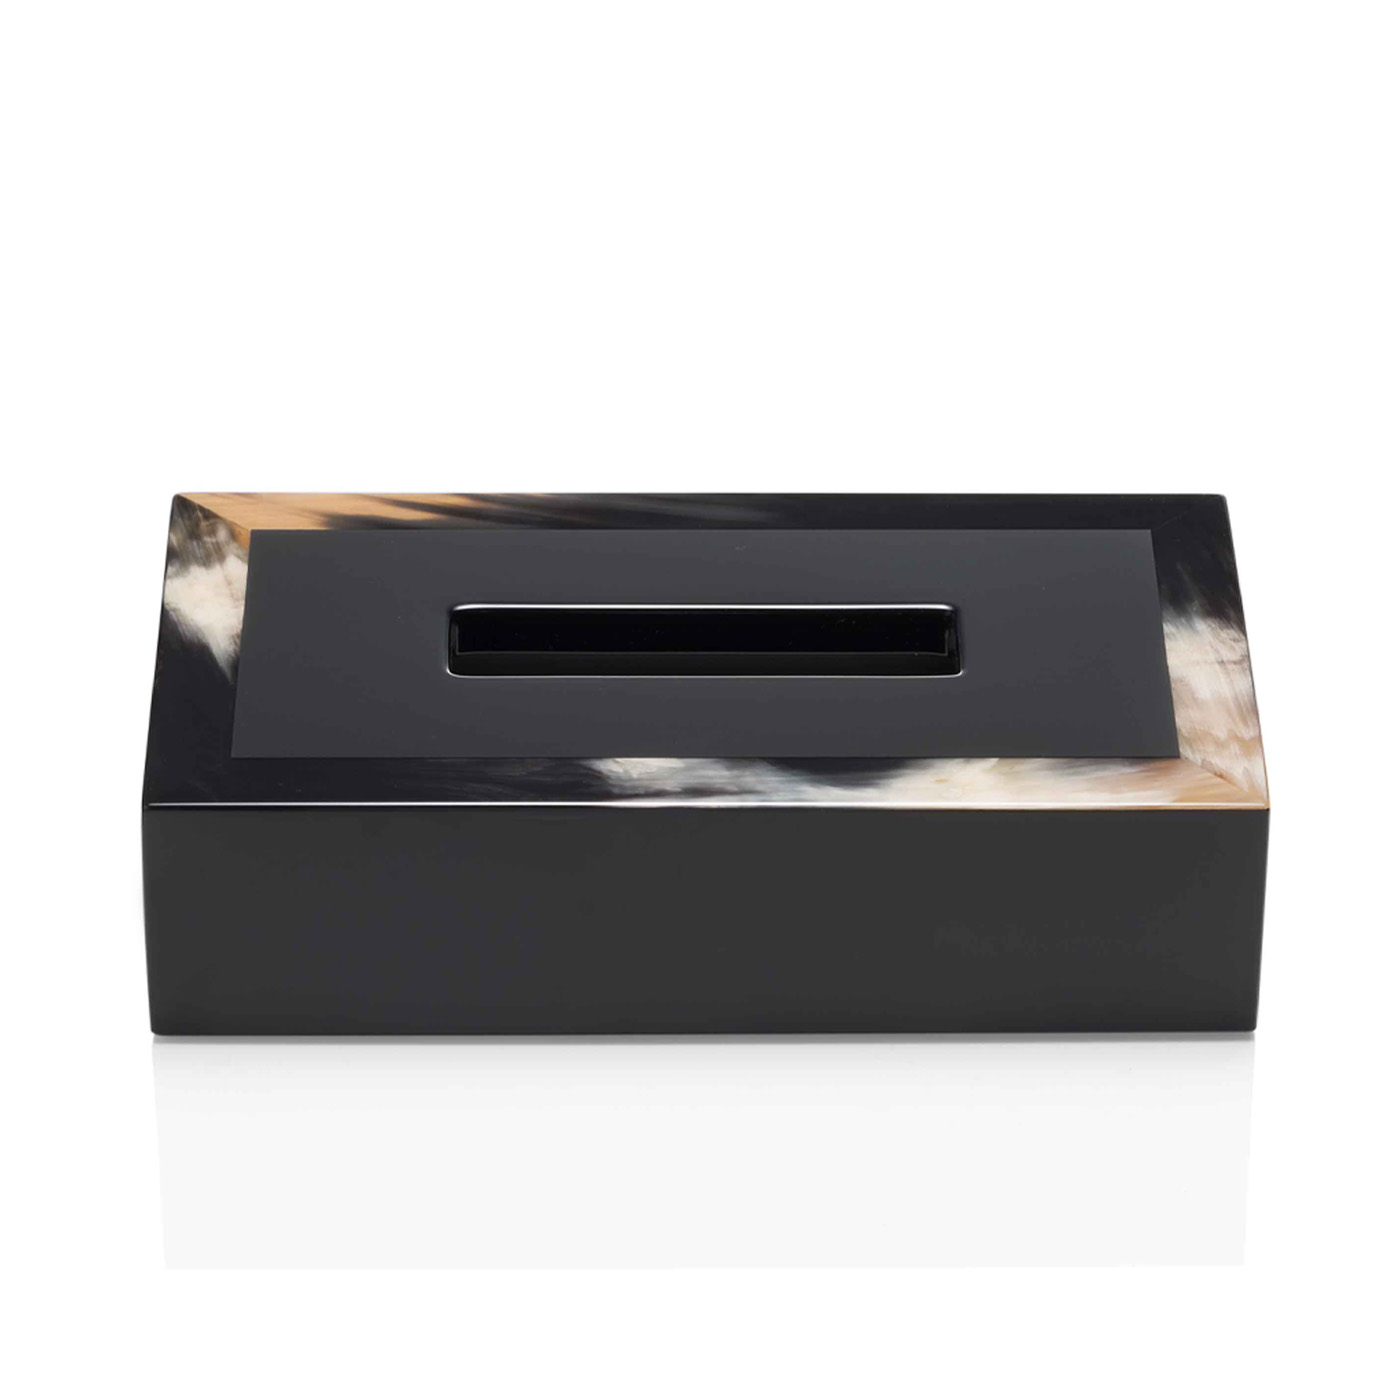 Bath sets - Geremia tissue box holder in horn and glossy black lacquered wood 5318s - Arcahorn